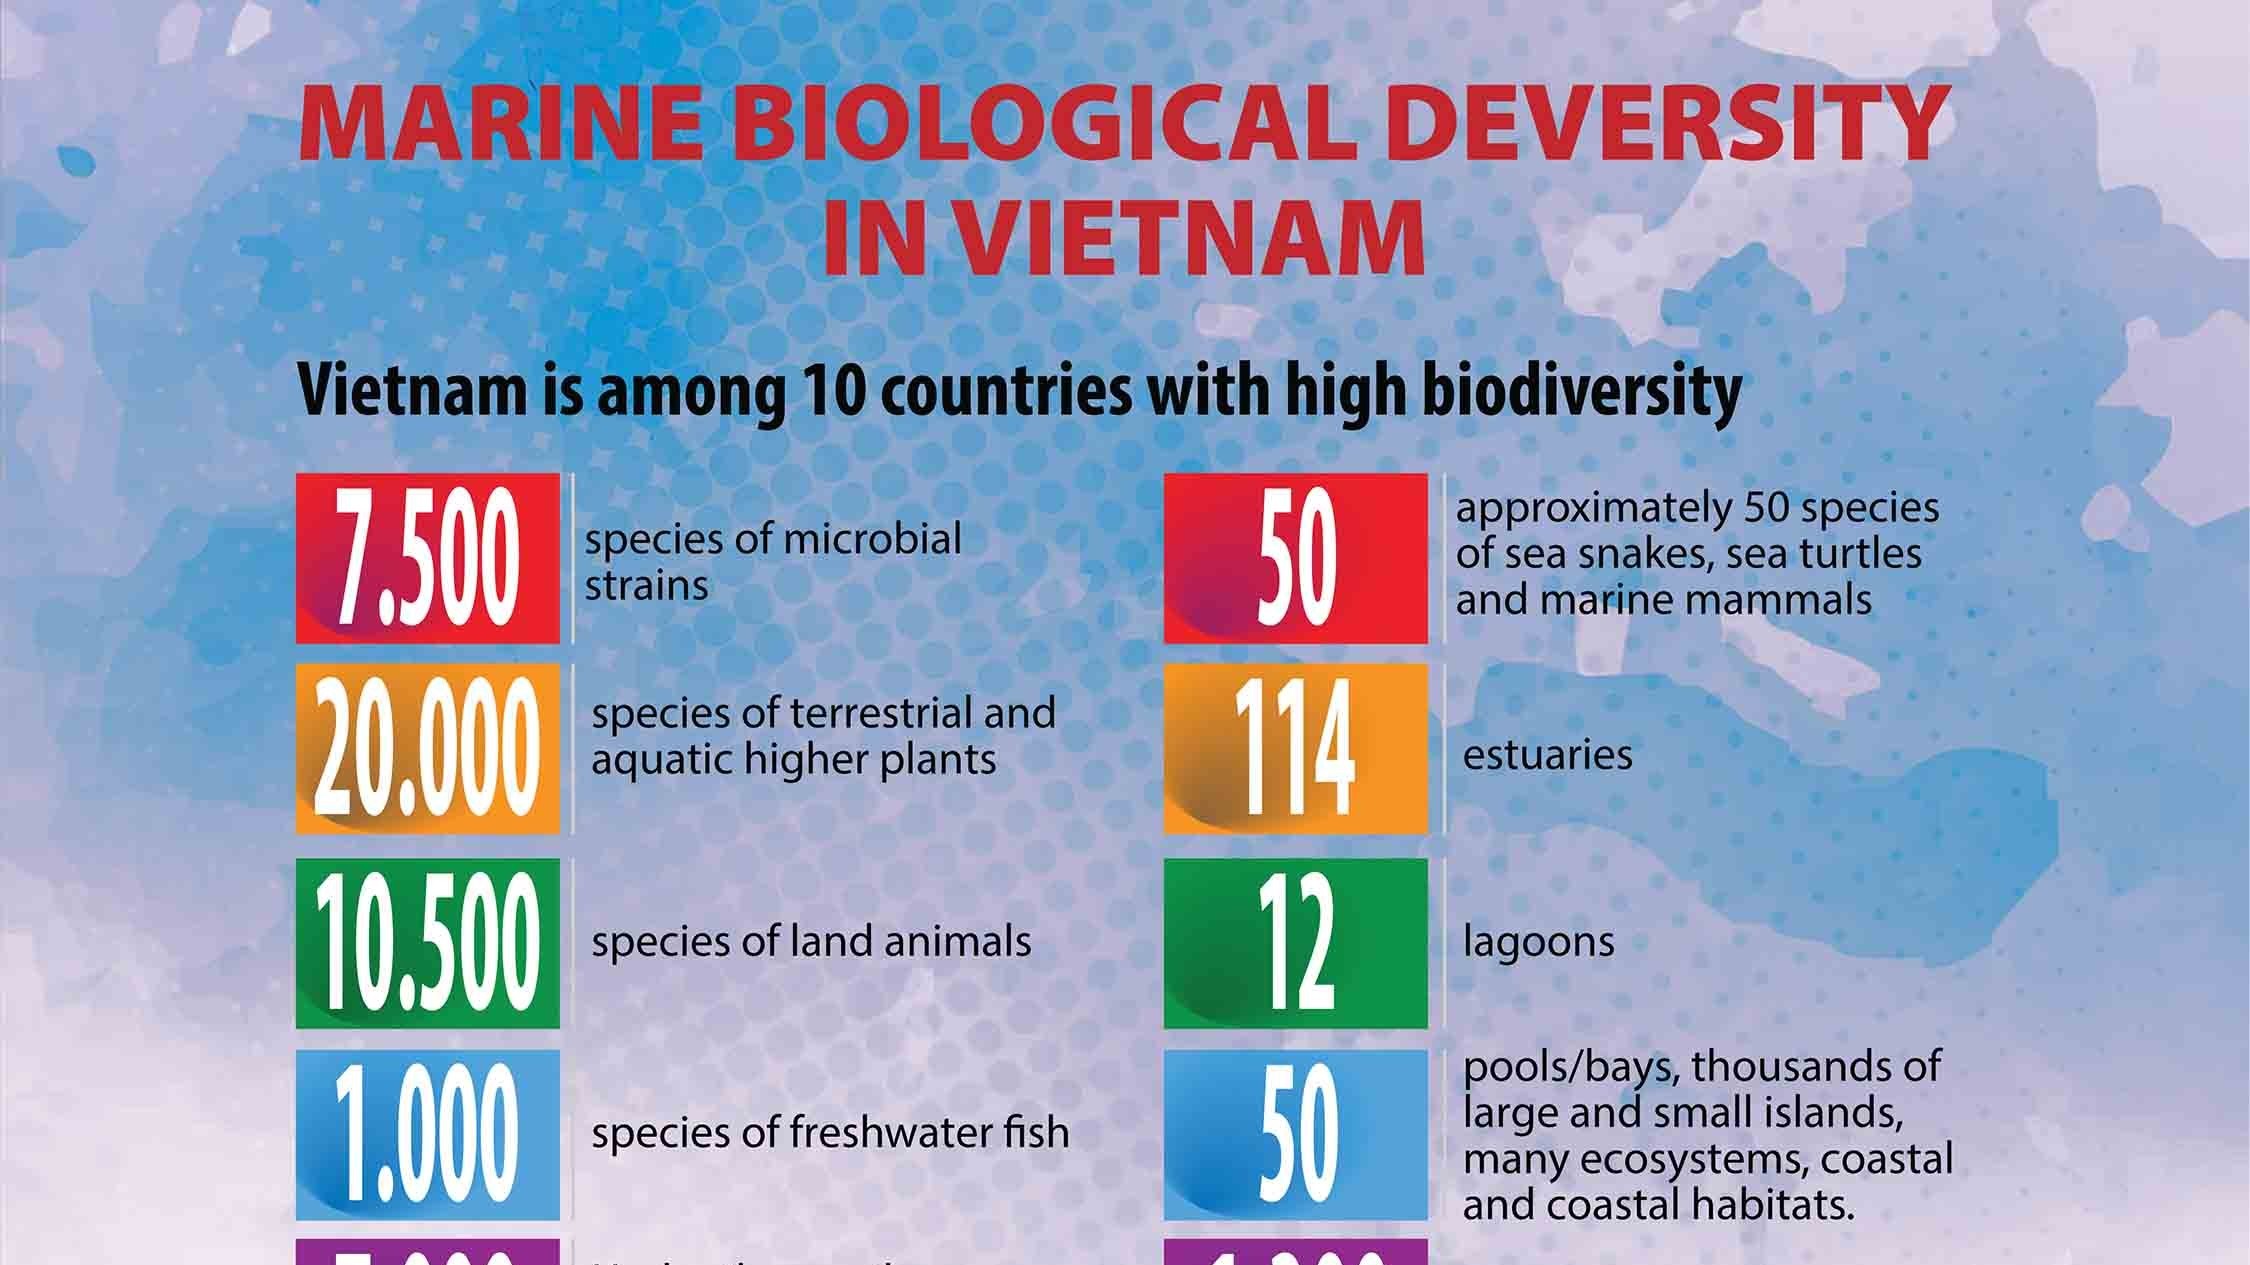 Marine biological diversity and impacts of climate change in Vietnam